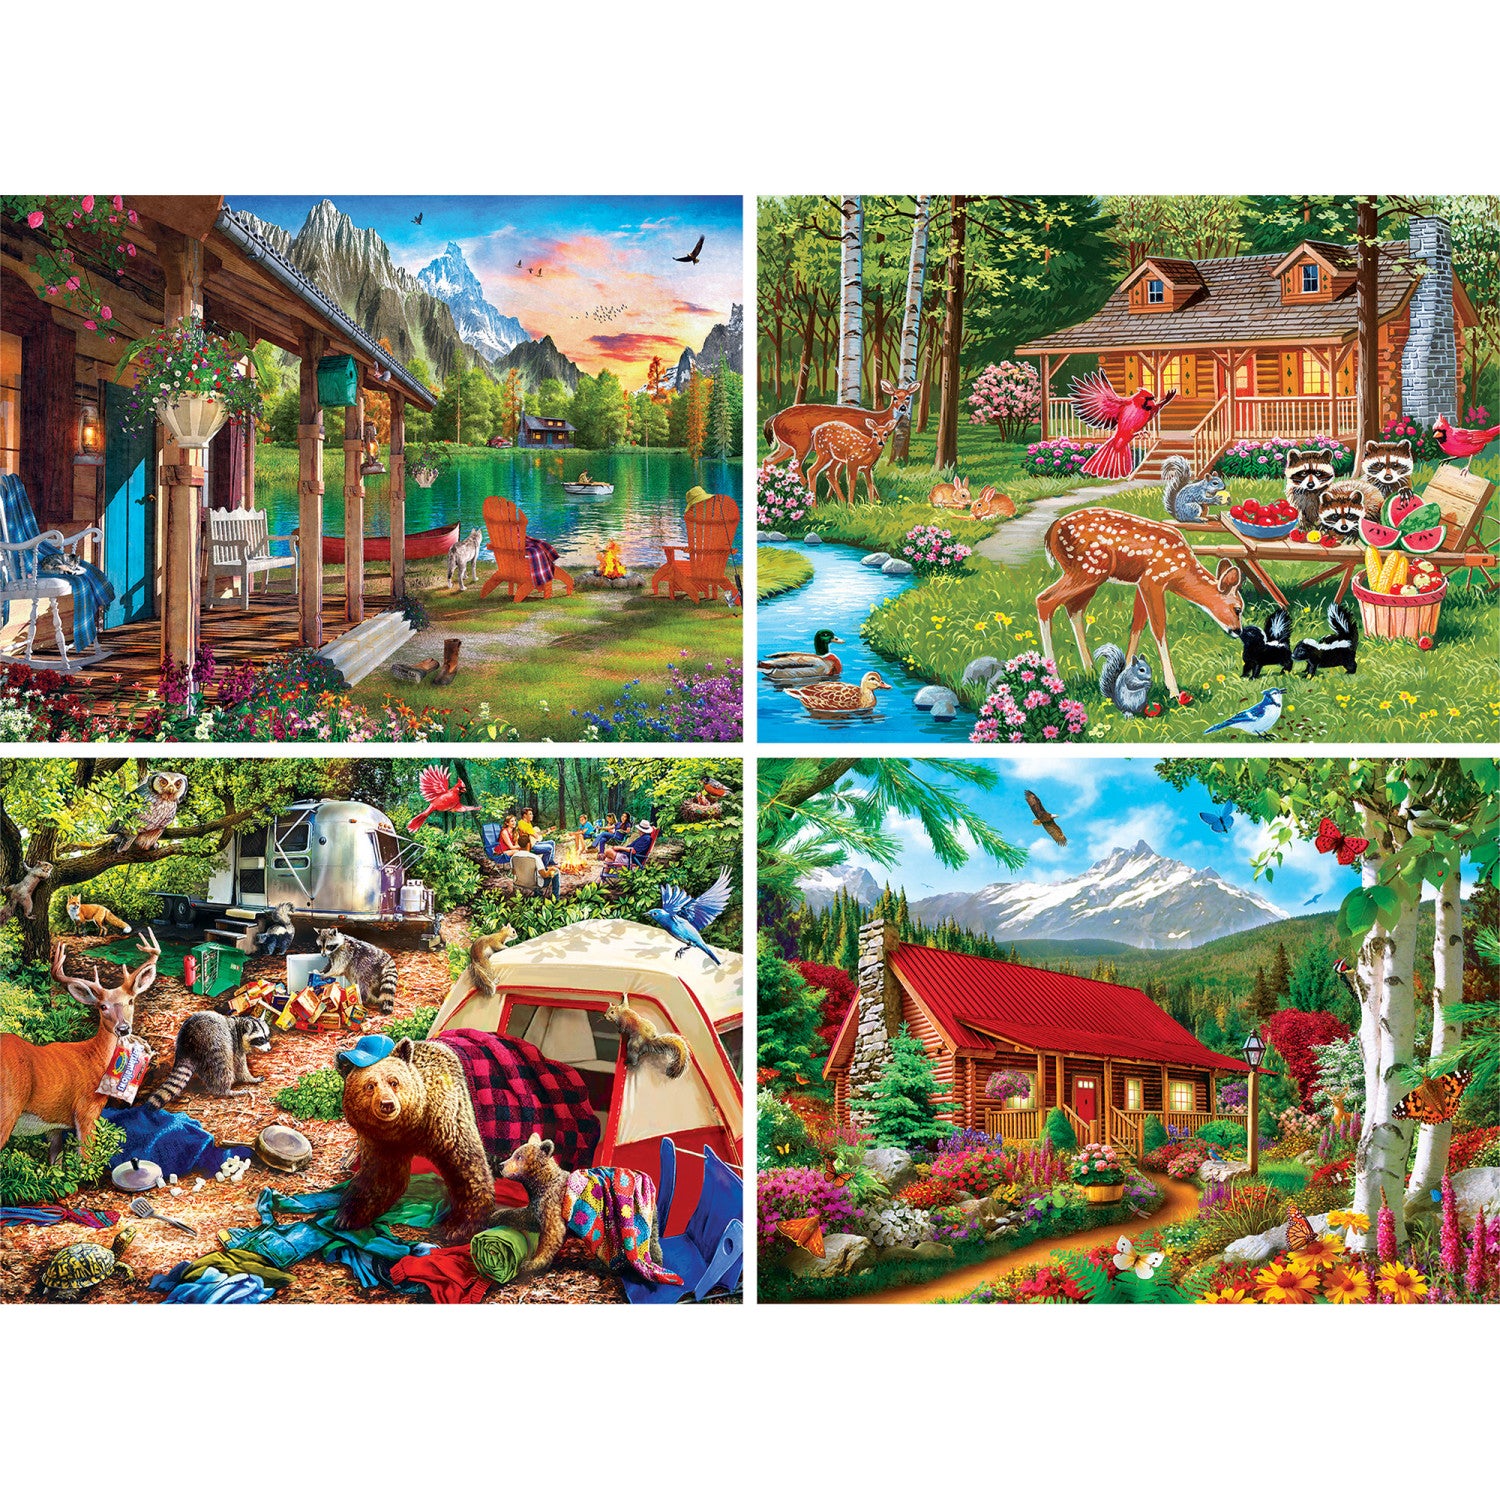 Space Savers - Great Outdoors 4 Pack 500 Piece Puzzles